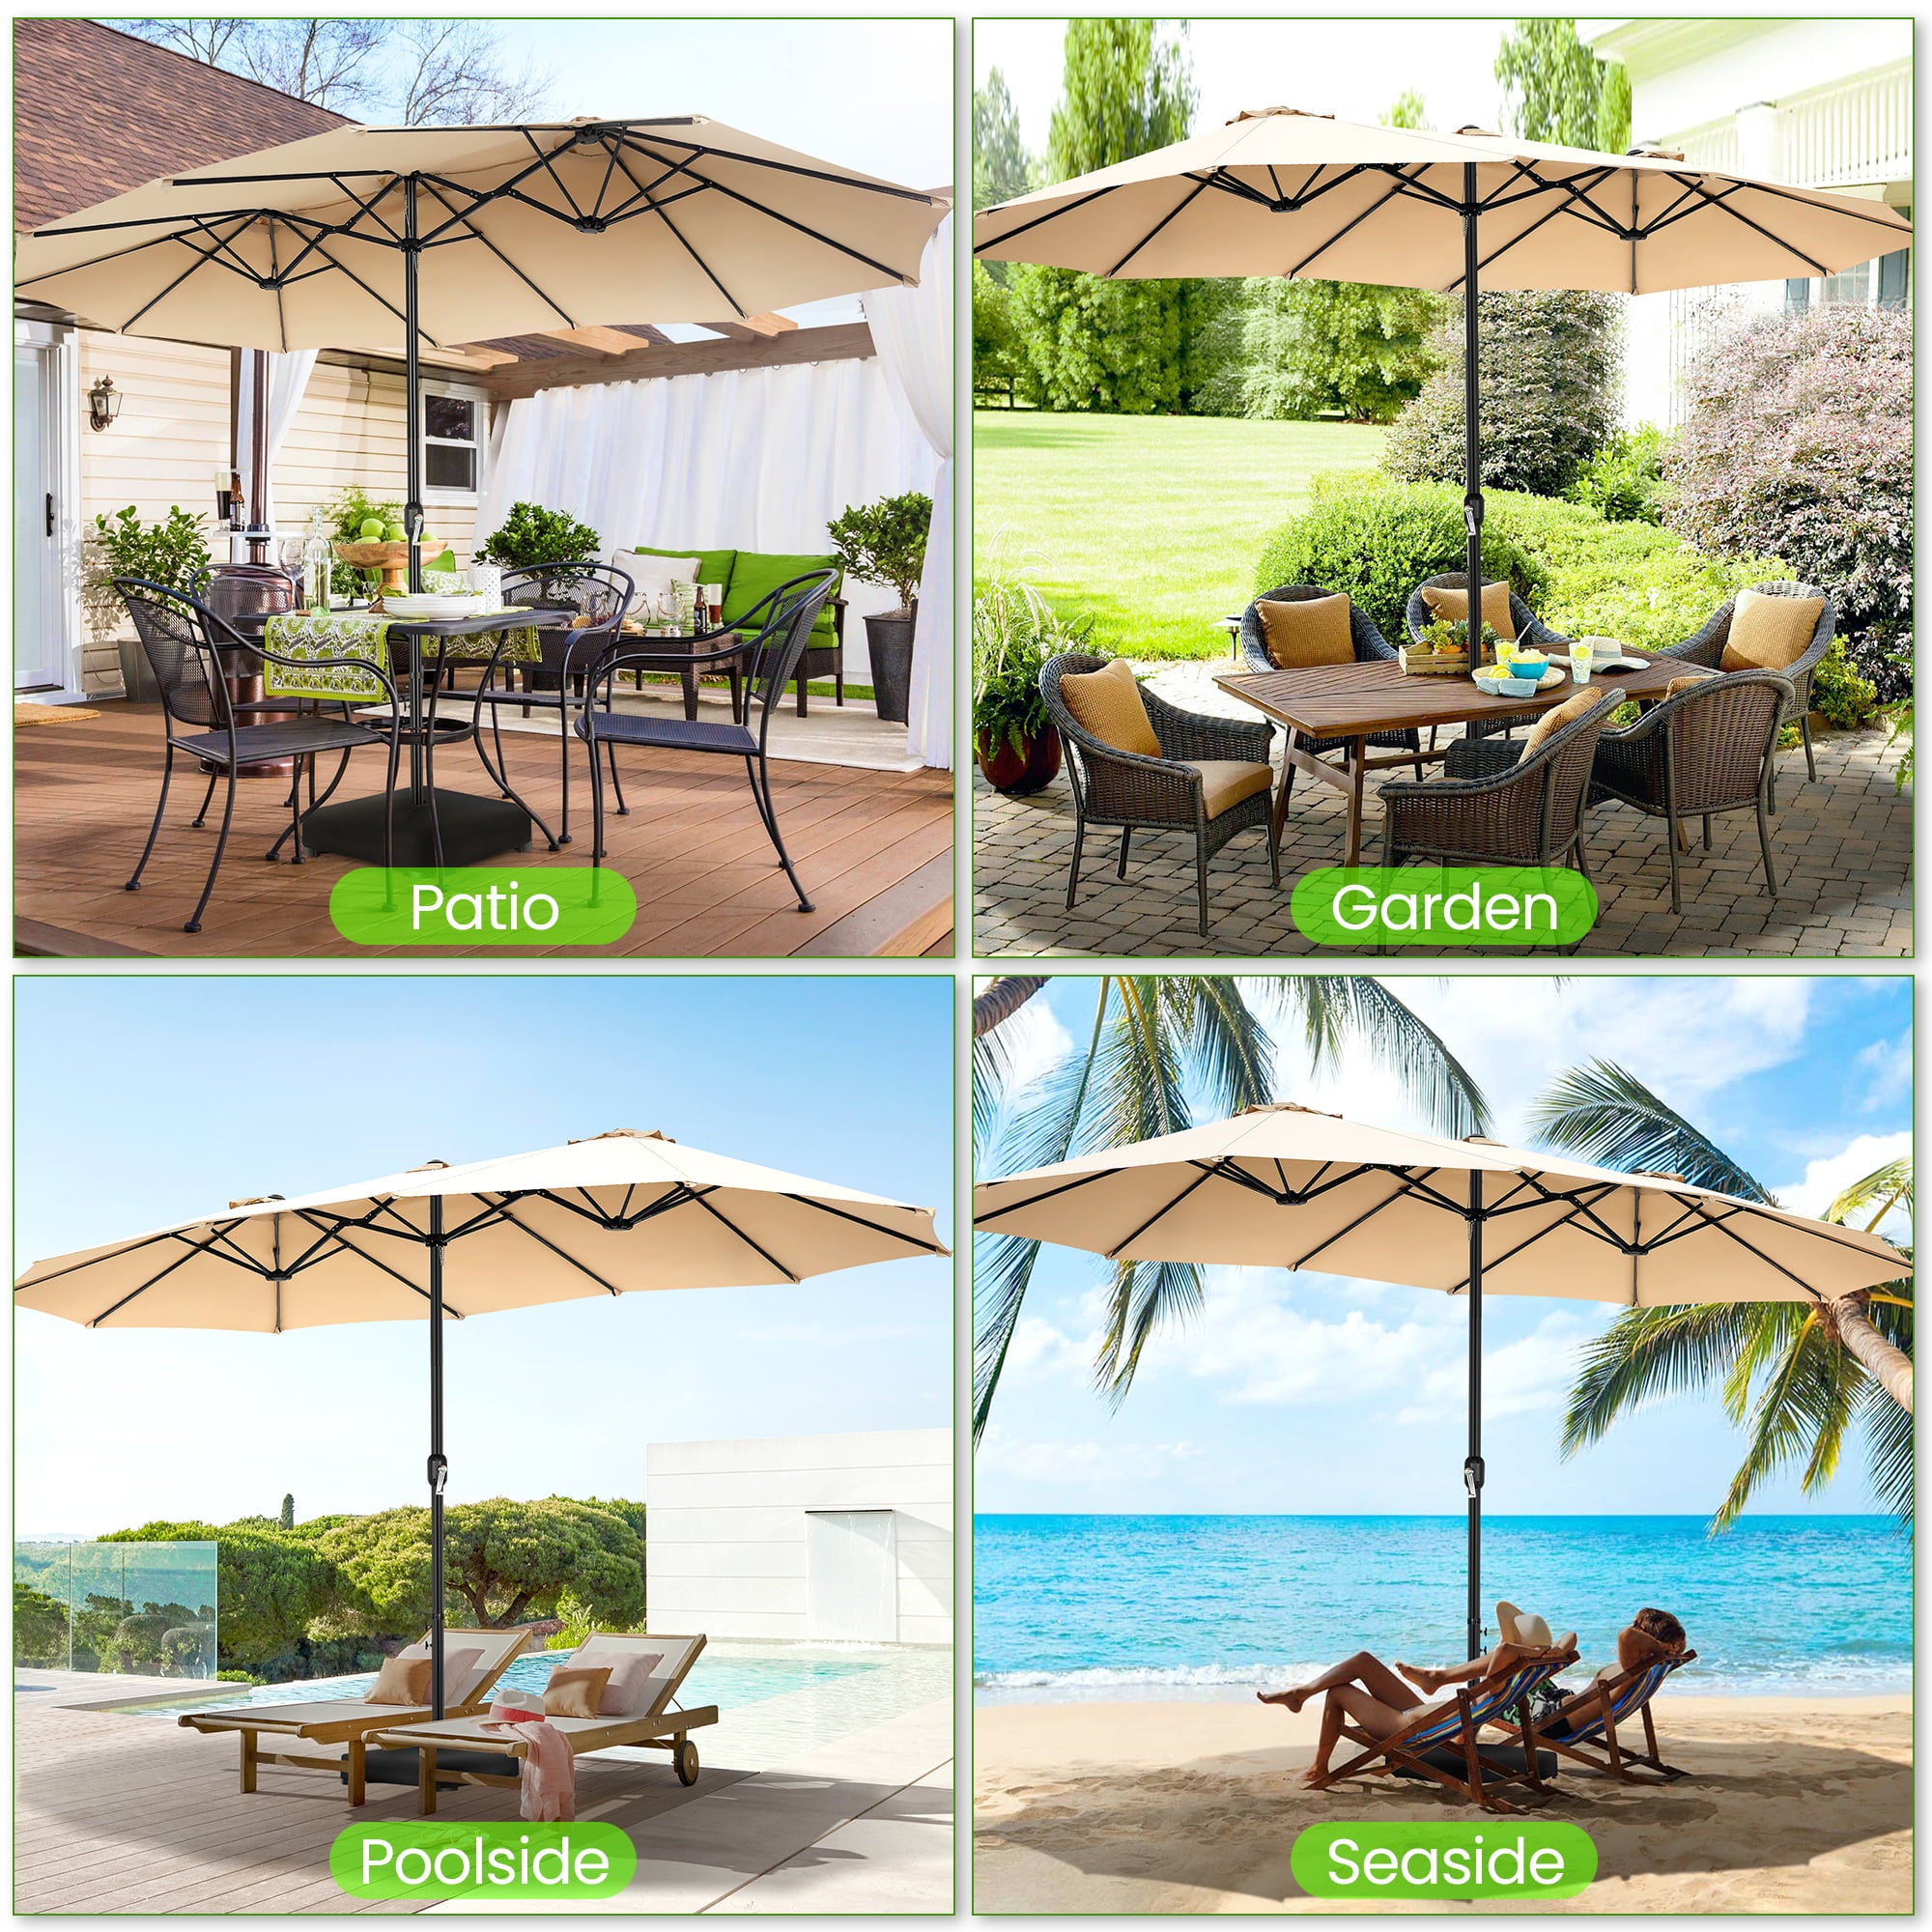 SEJOV 15ft Patio Umbrella with Base Included, Double-Sided Market Umbrella with Crank Large Outdoor Umbrella Rectangular Umbrellas for Patio Table